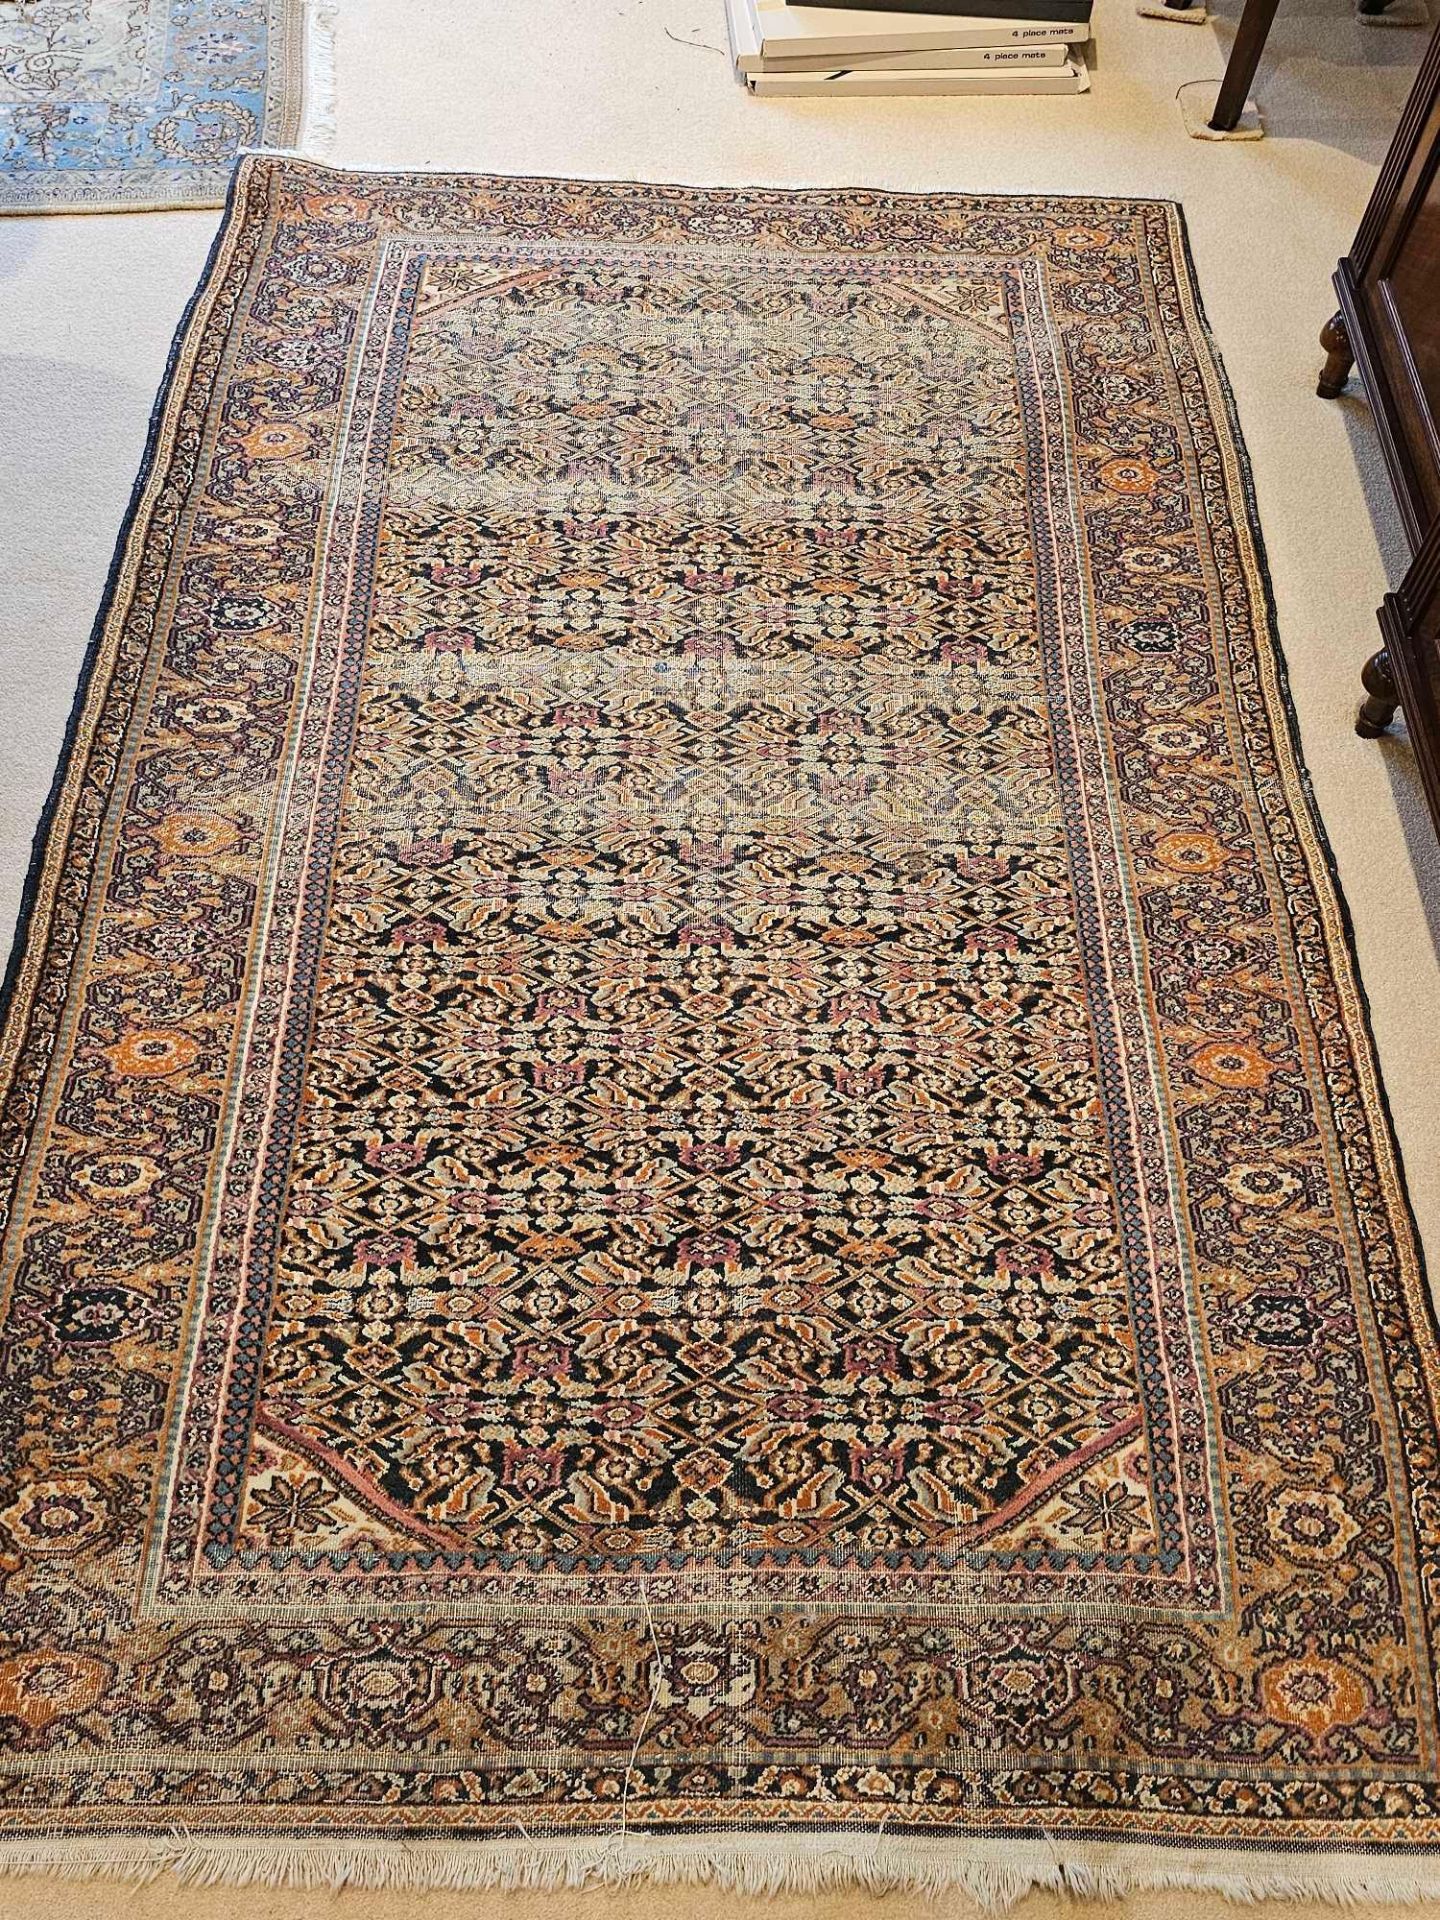 A Tabriz Rug, North West Persia, Wool On Cotton Foundation. The Blue Field With An All-over - Image 2 of 6